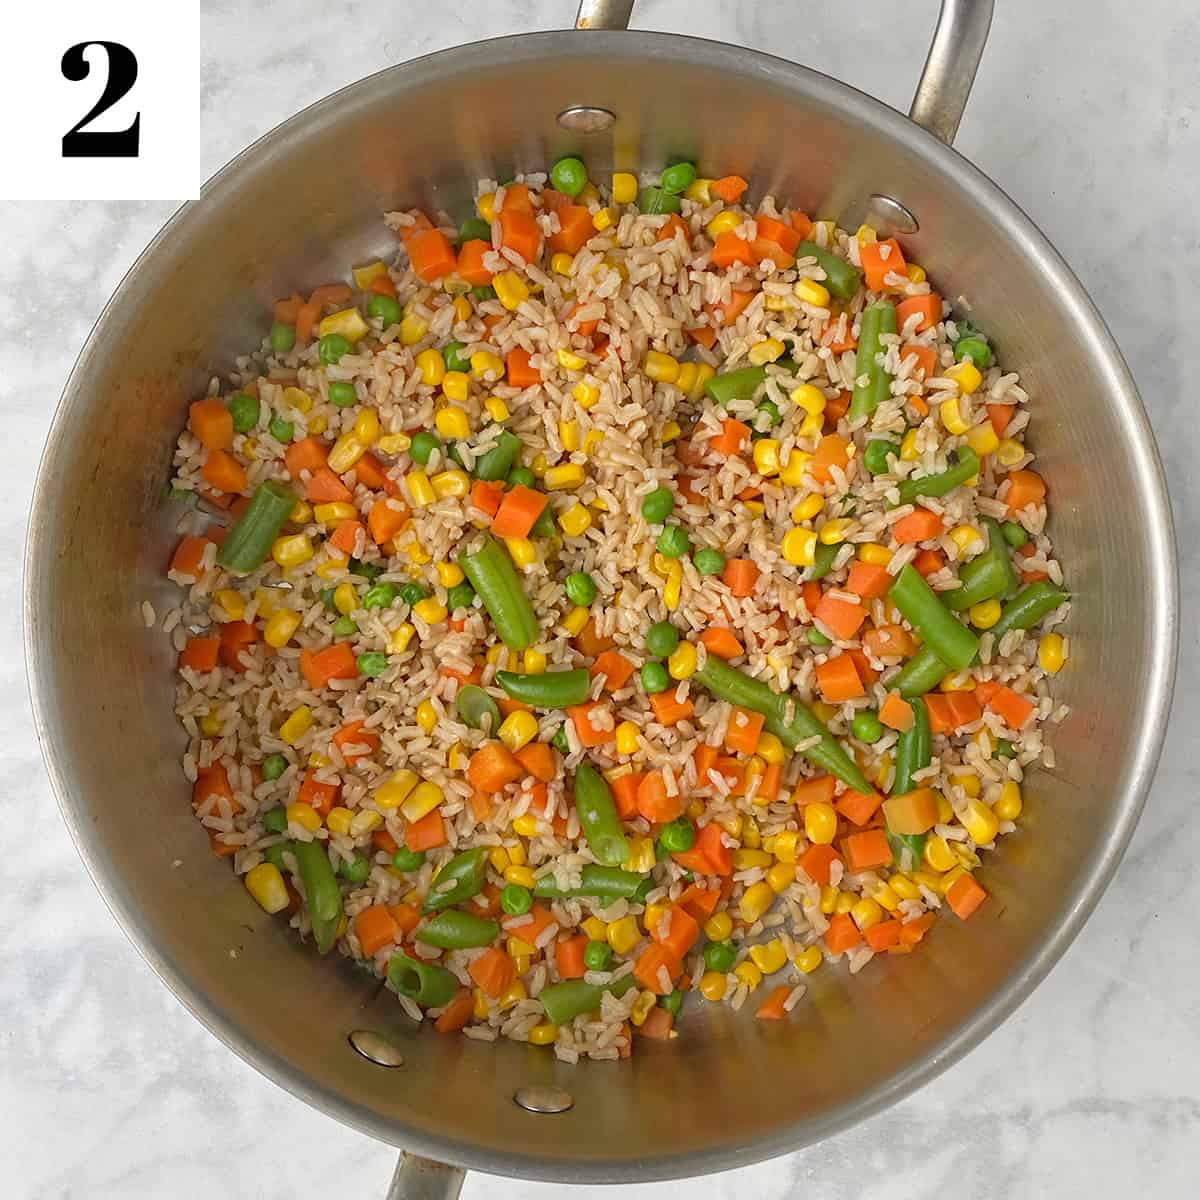 brown rice and vegetables in pan.